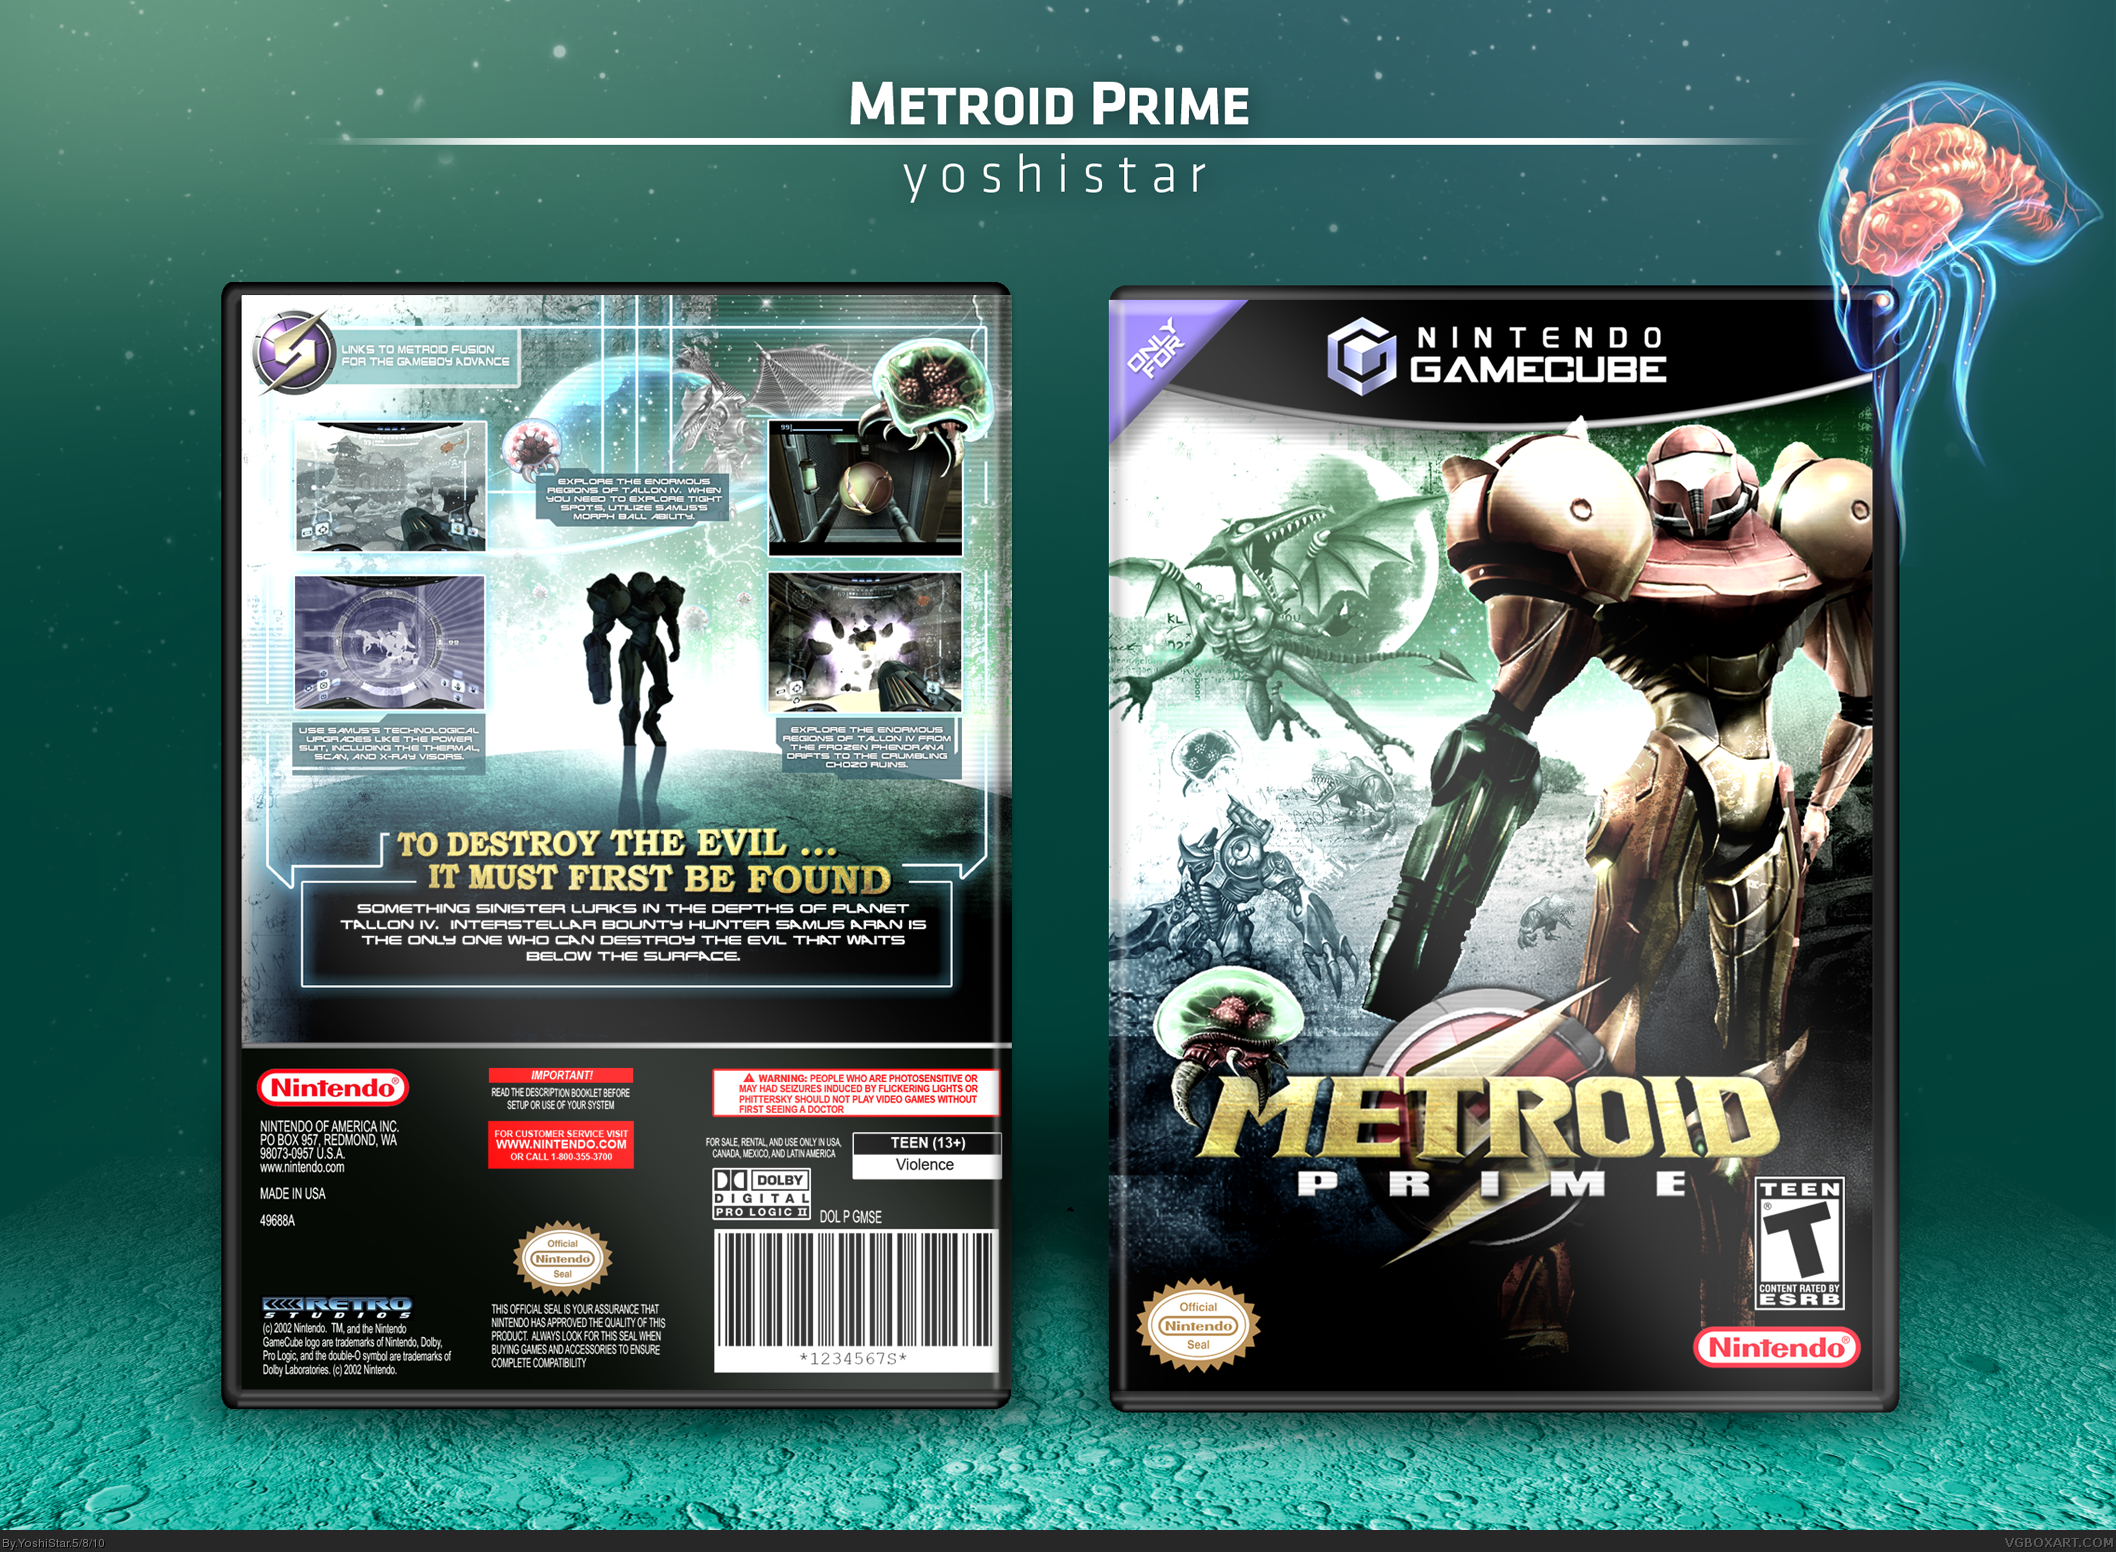 Viewing full size Metroid Prime box cover.